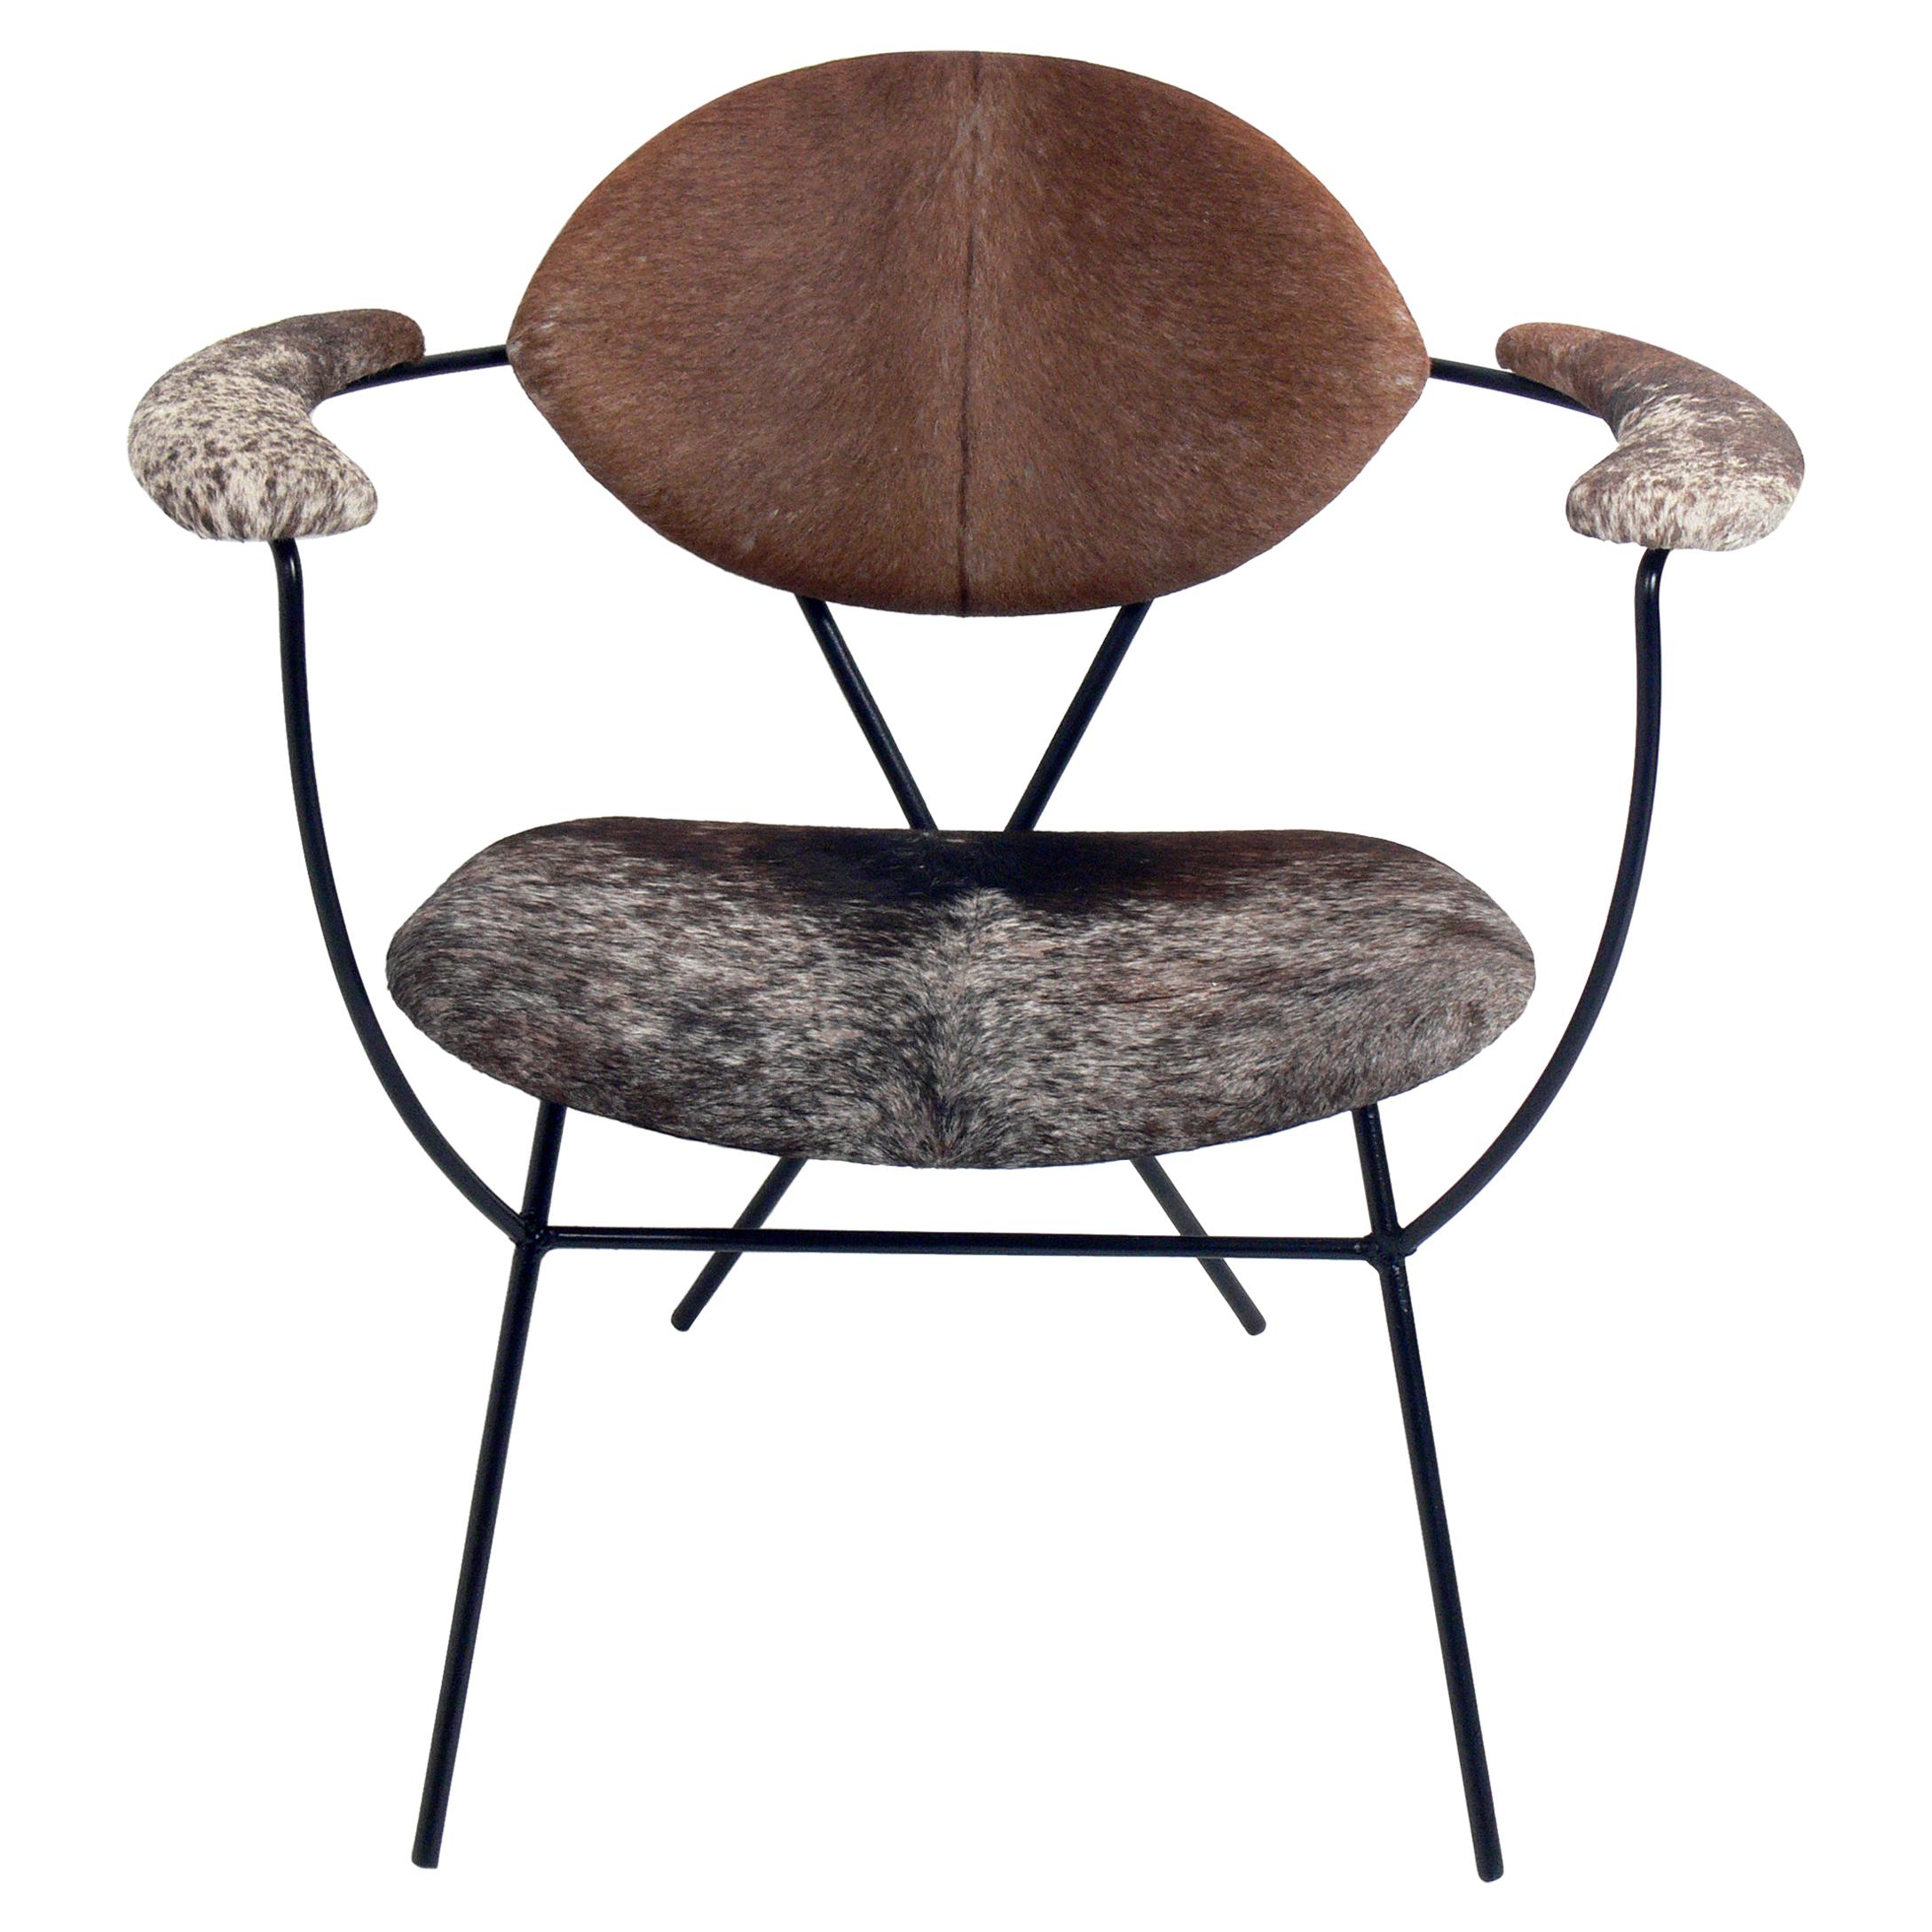 Sculptural Iron and Cowhide Lounge Chair by Joseph Cicchelli